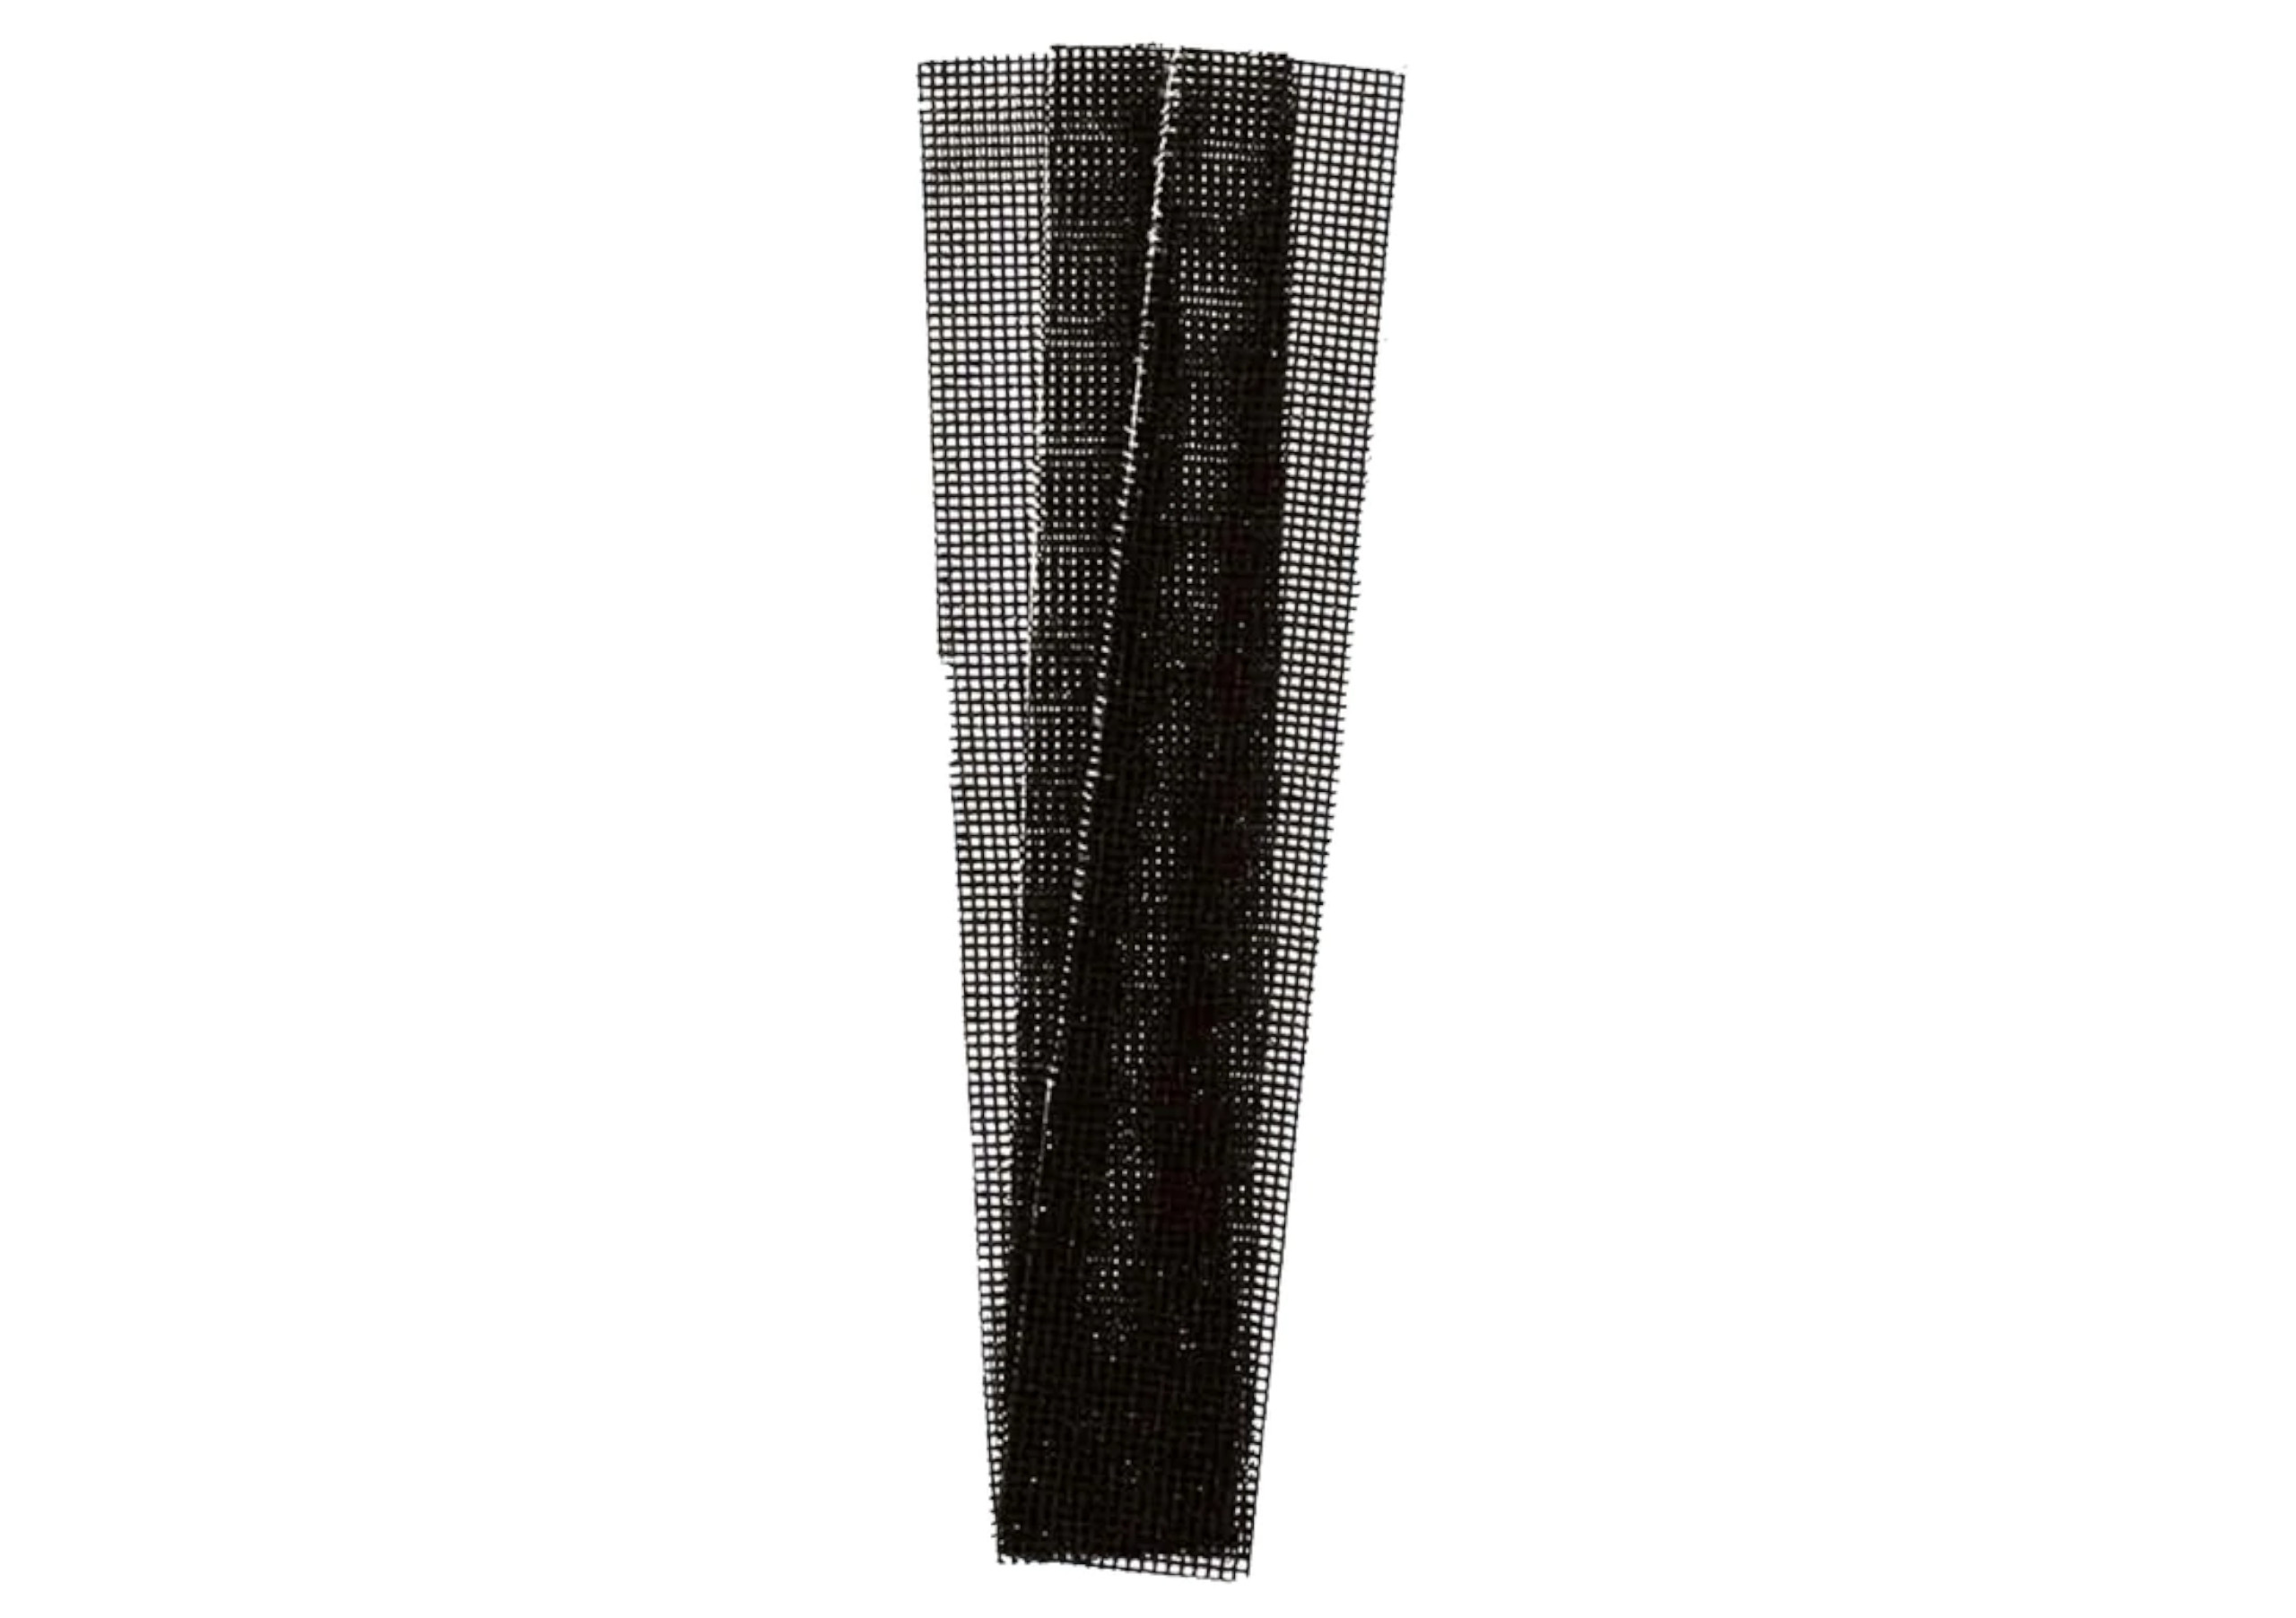 This is an image of our Mesh Sanding Strips